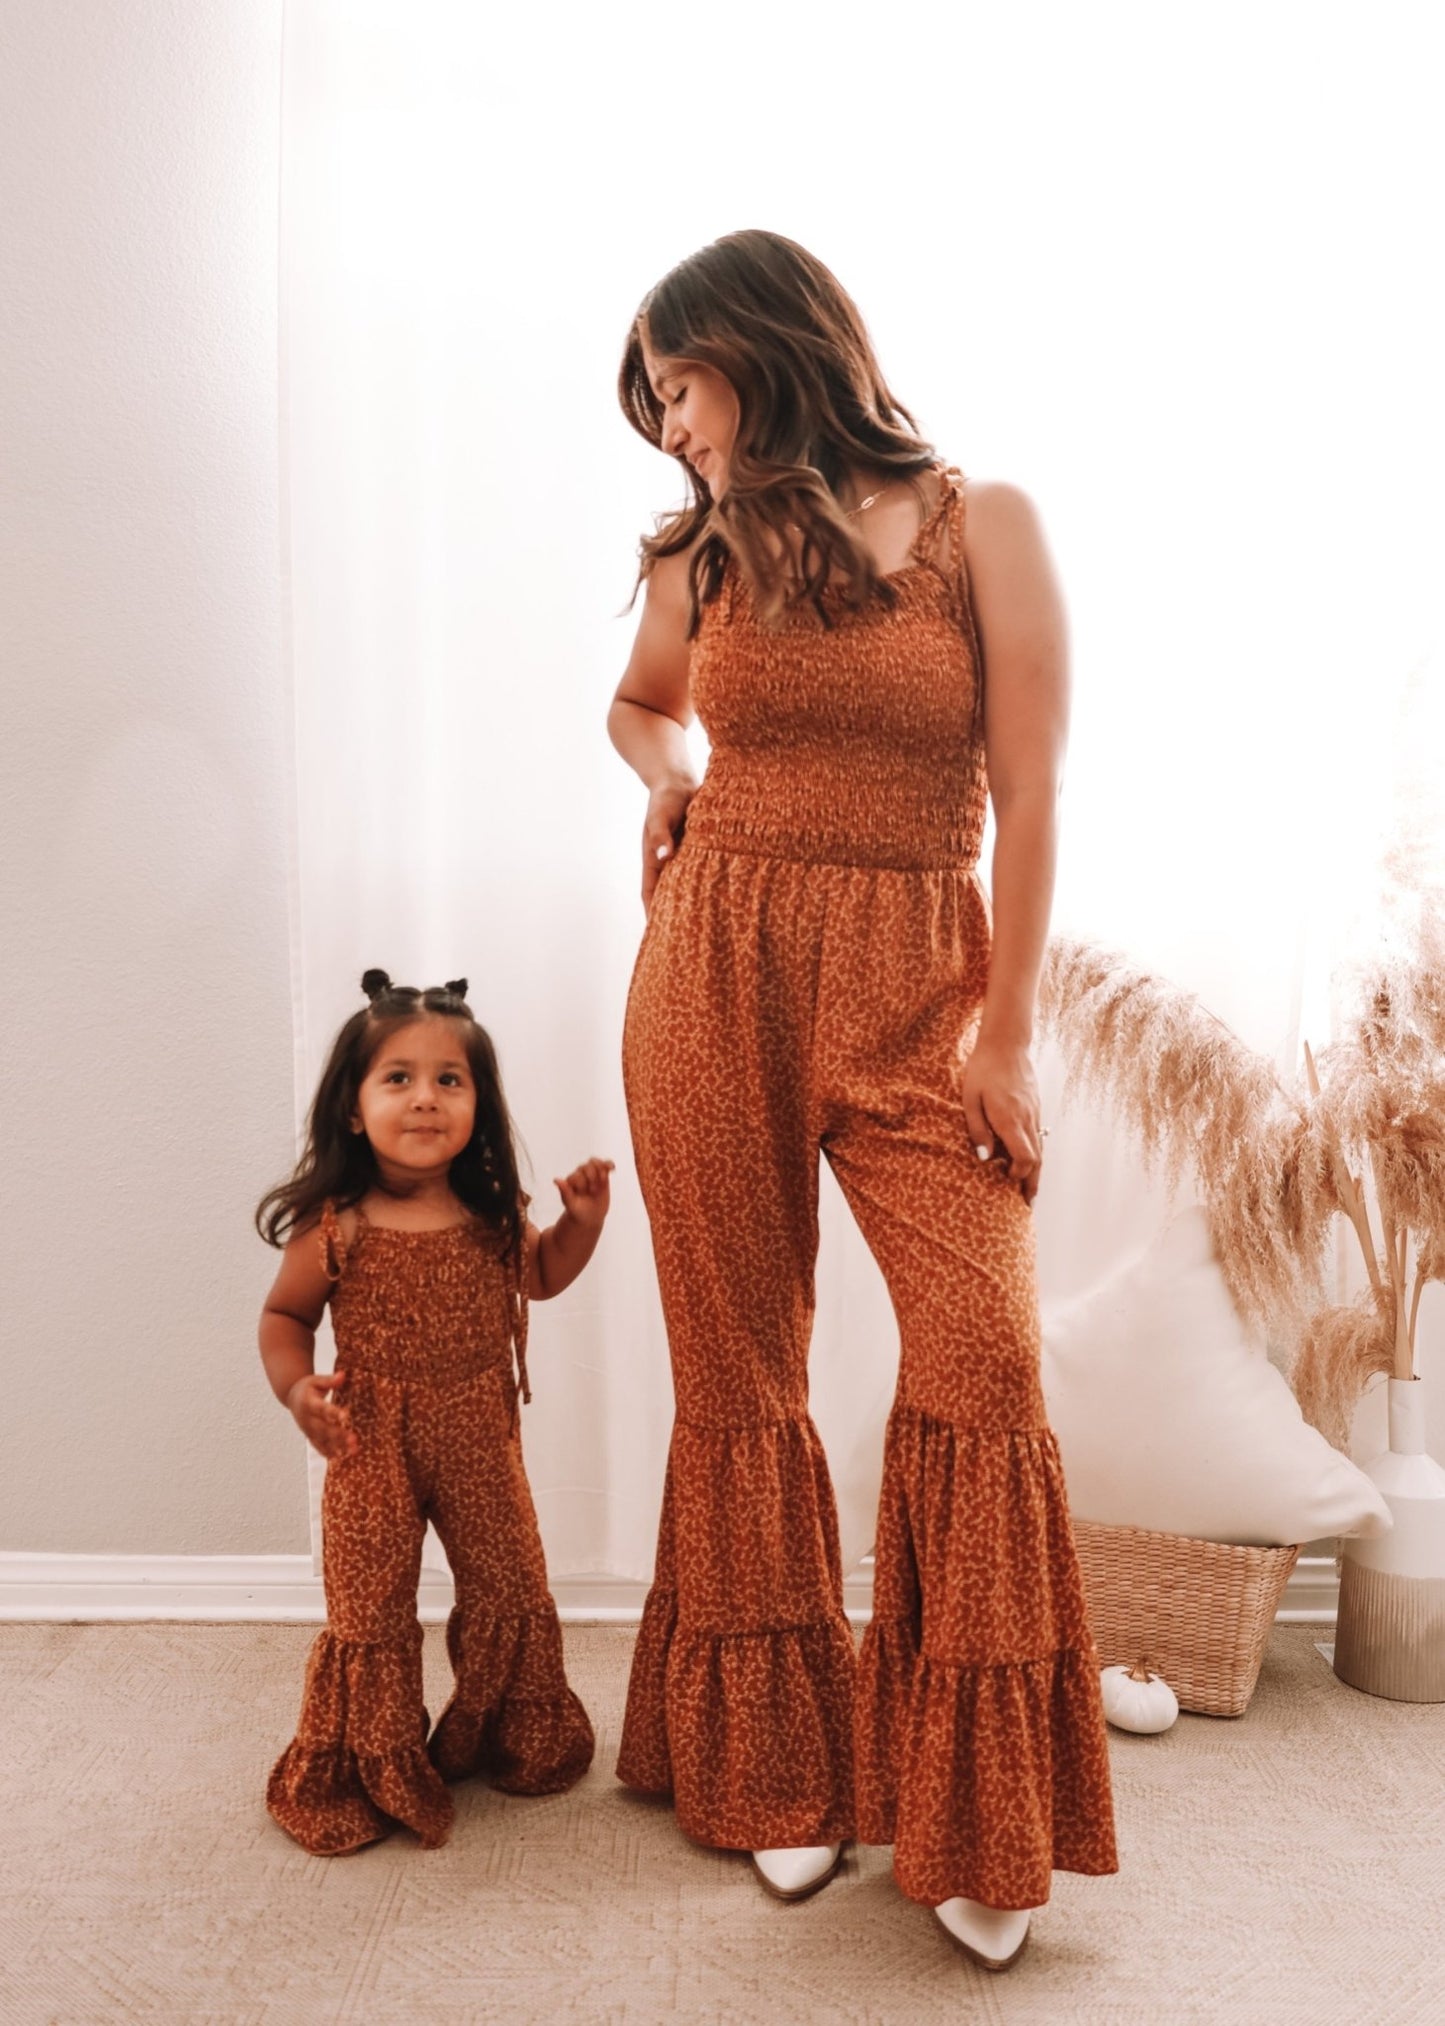 Mommy and Me Outfits – LITTLE MIA BELLA